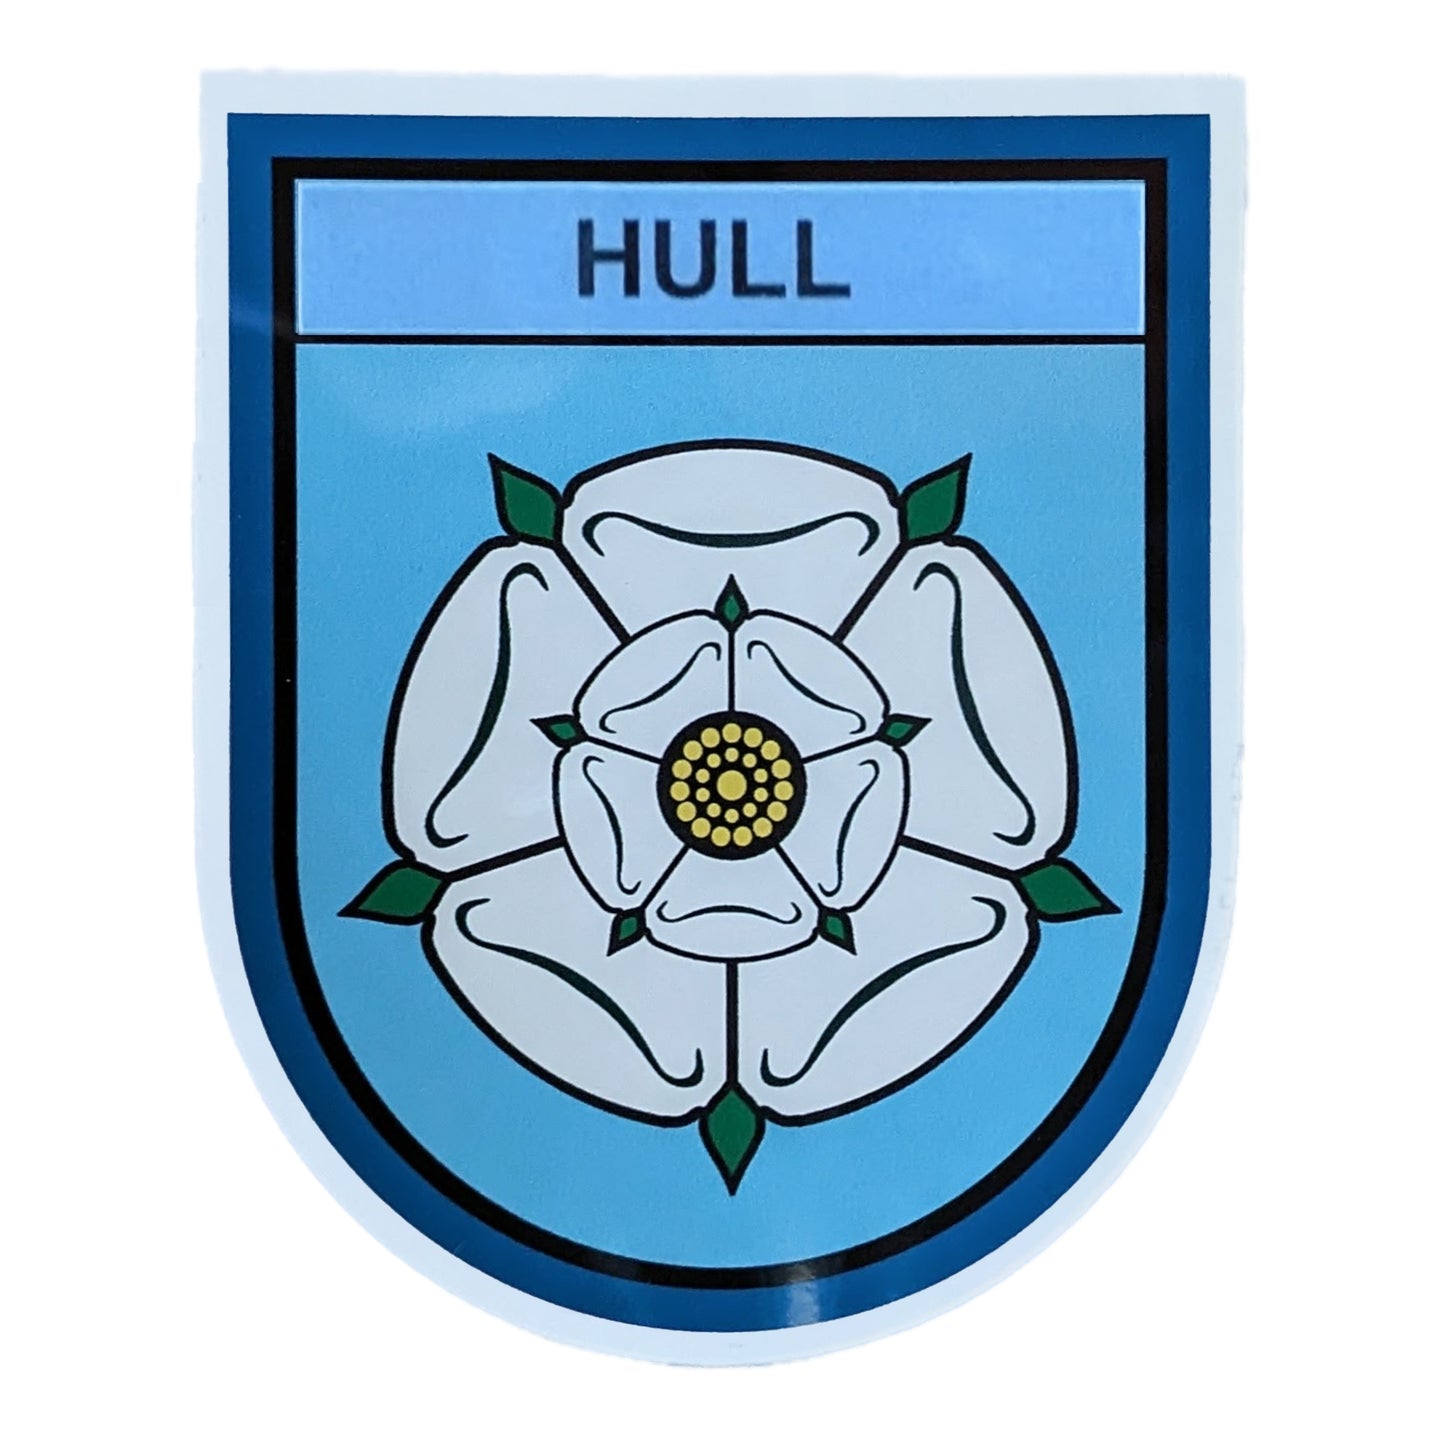 Hull White Rose Sticker - The Great Yorkshire Shop